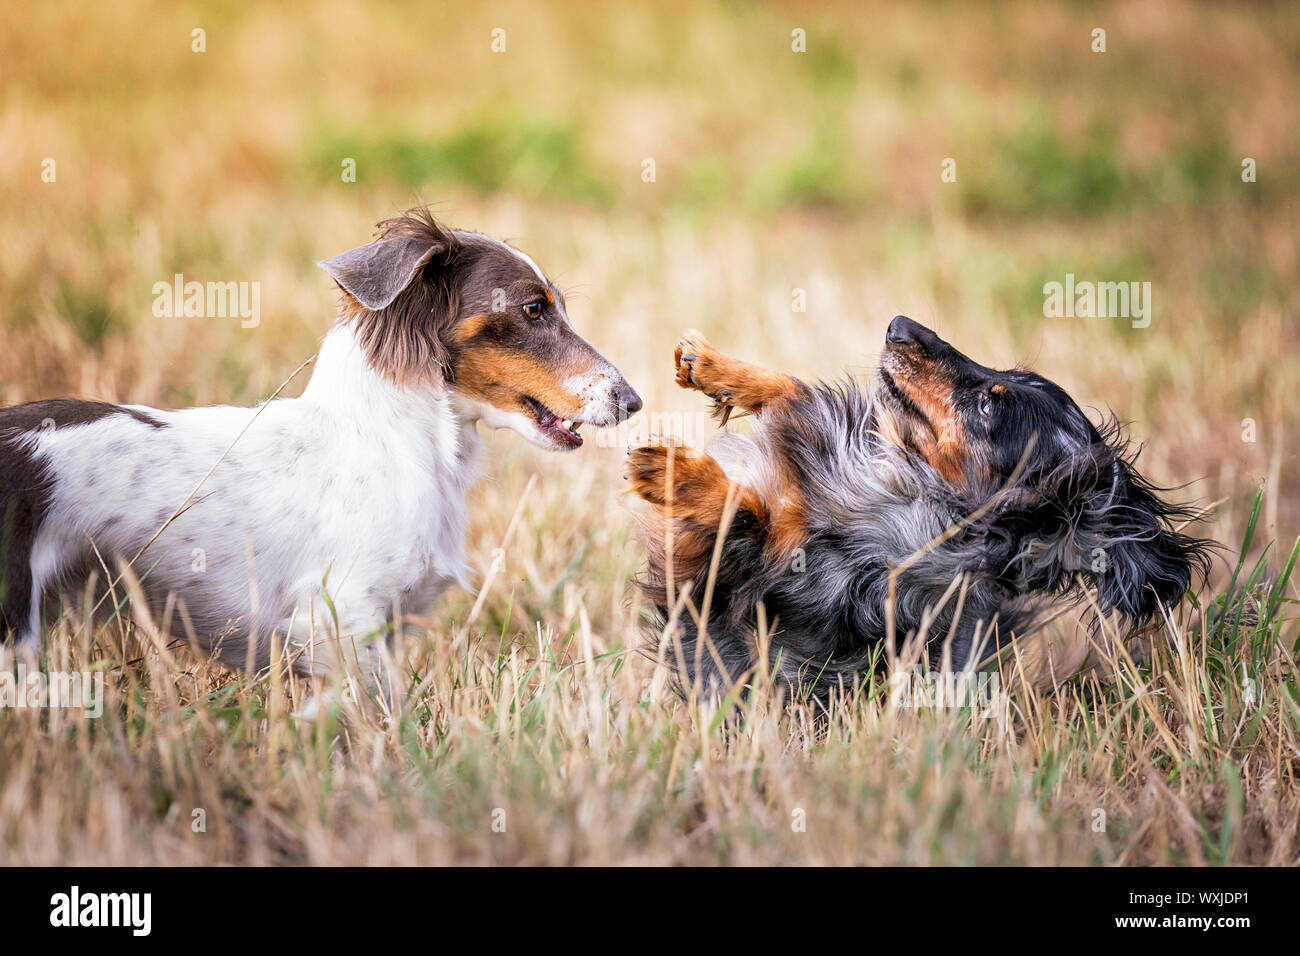 Long-haired Dachshund. Two adult dogs playing in grass, Right: merle, left: dapple.  Germany Stock Photo